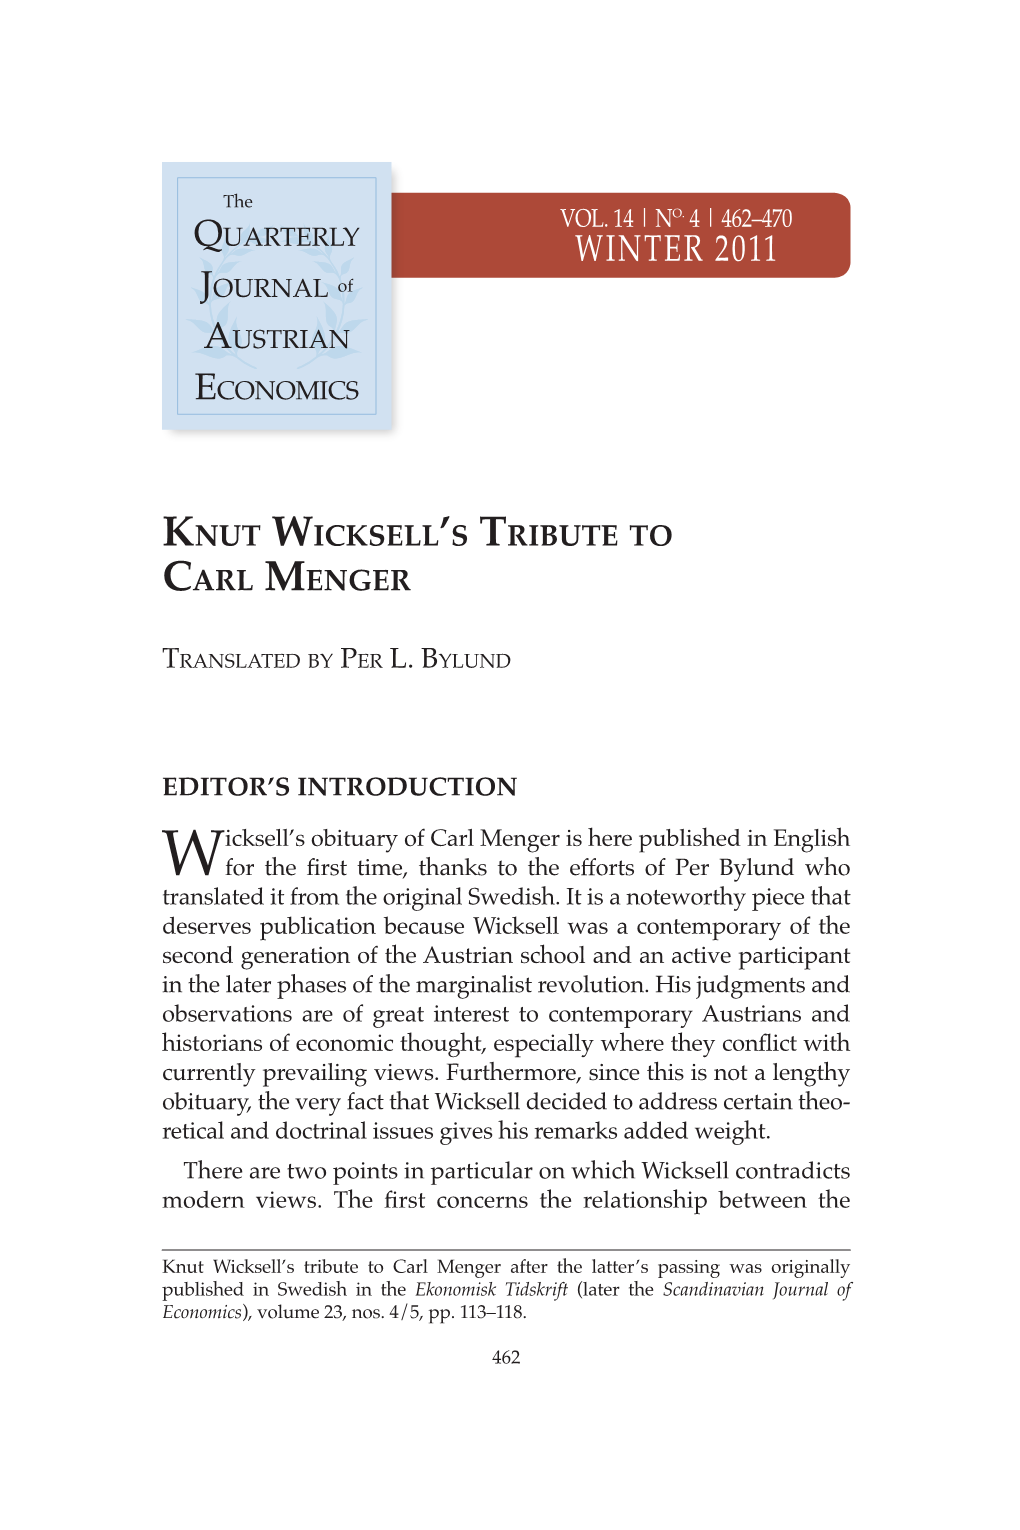 Knut Wicksell's Tribute to Carl Menger